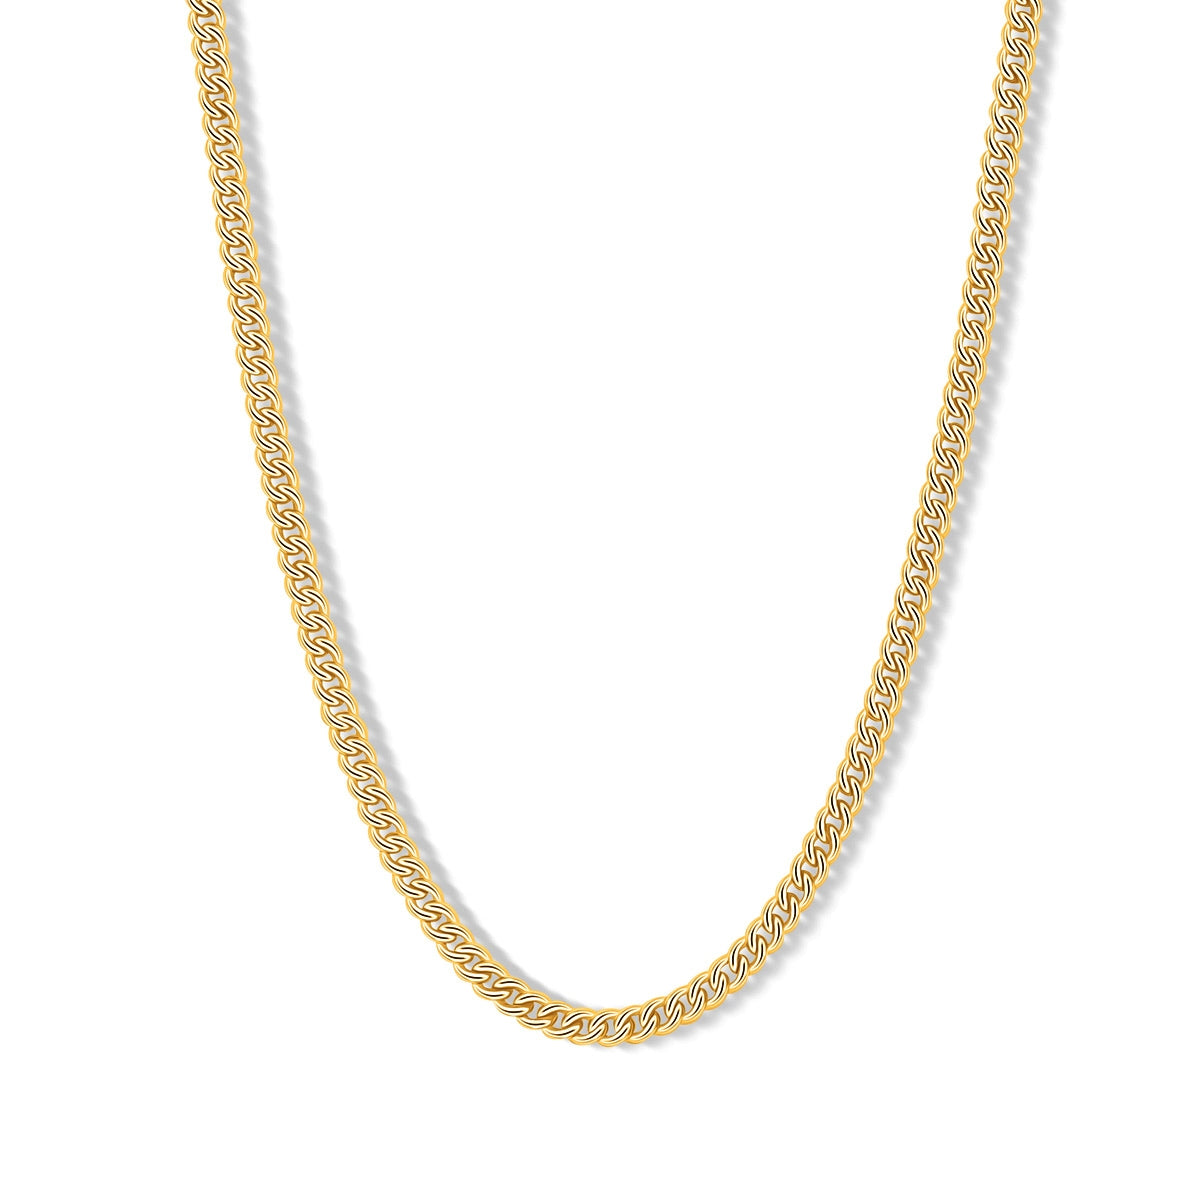 Thin gold plated chain necklace